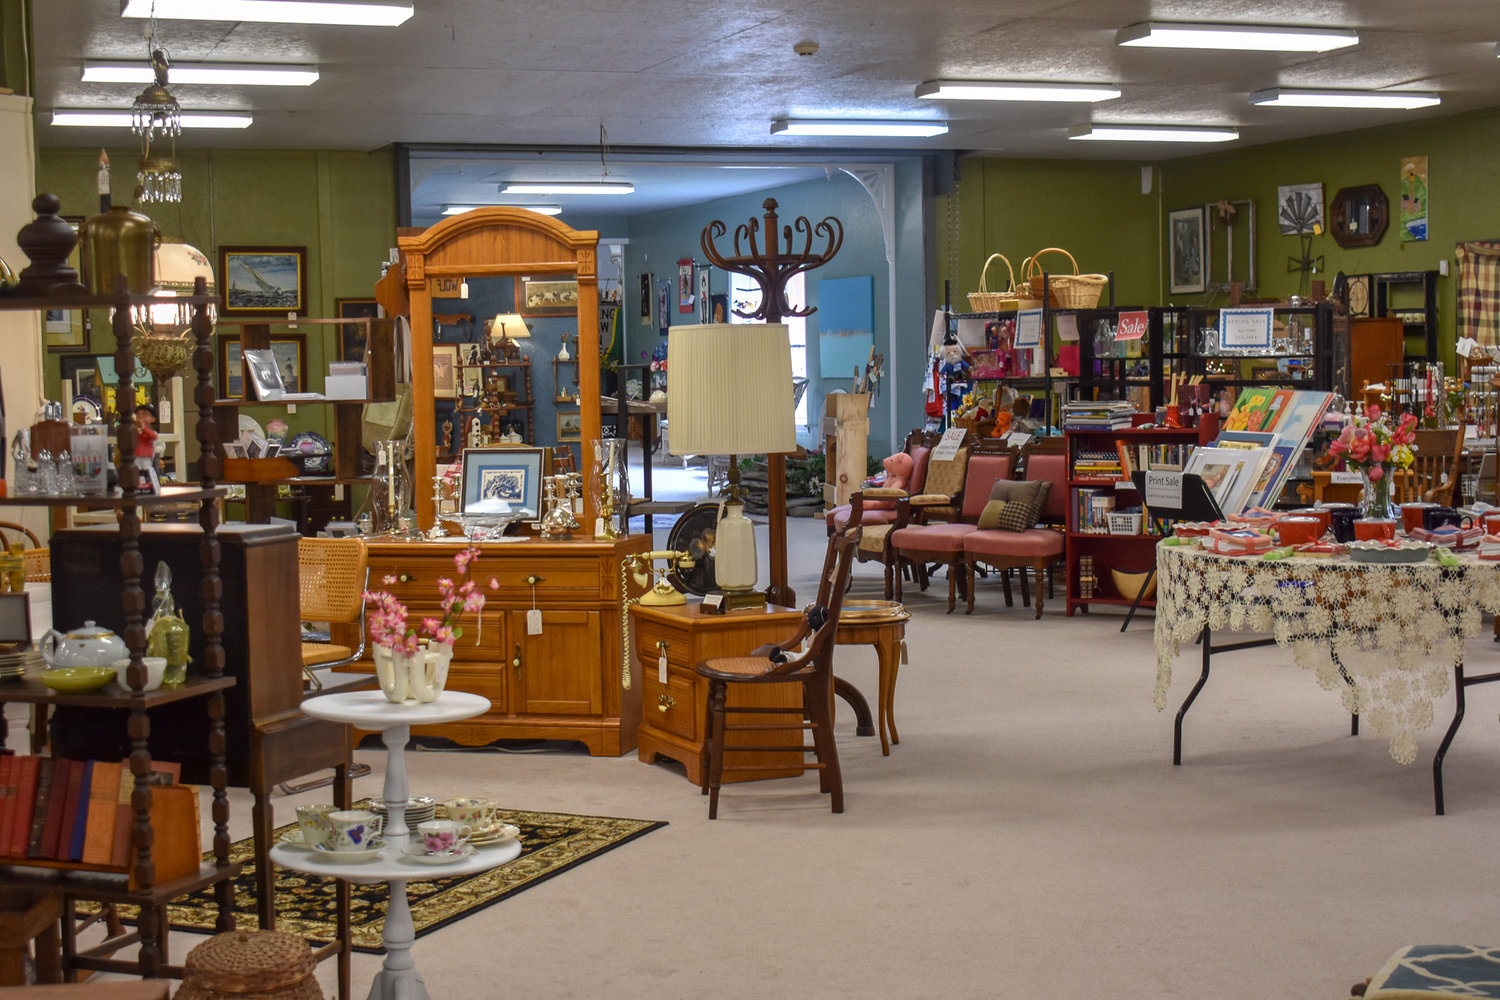 Throughout the Shoppes at Johnny Appleseed's nearly 20,000 square foot store are pockets of treasures formed by a collection of nearly 60 different vendors.